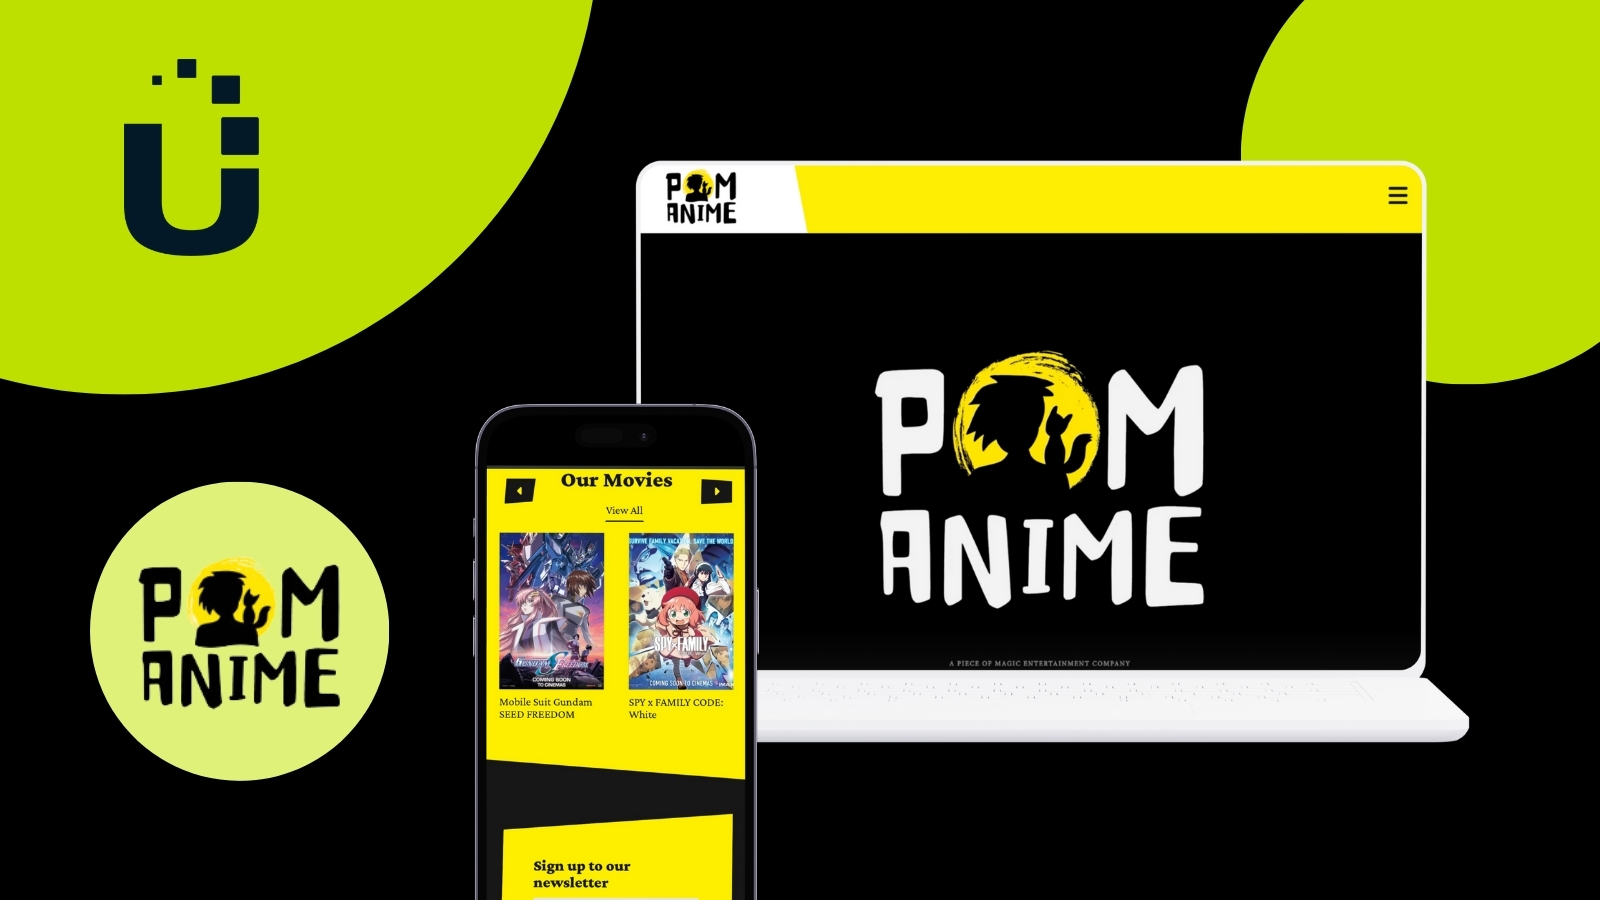 Image with a black background. The usheru logo is in the top left corner over a green circle. Below it is the Pom Anime logo, also in a green circle. To its right is an image of a computer and a phone showing the Pom Anime website.